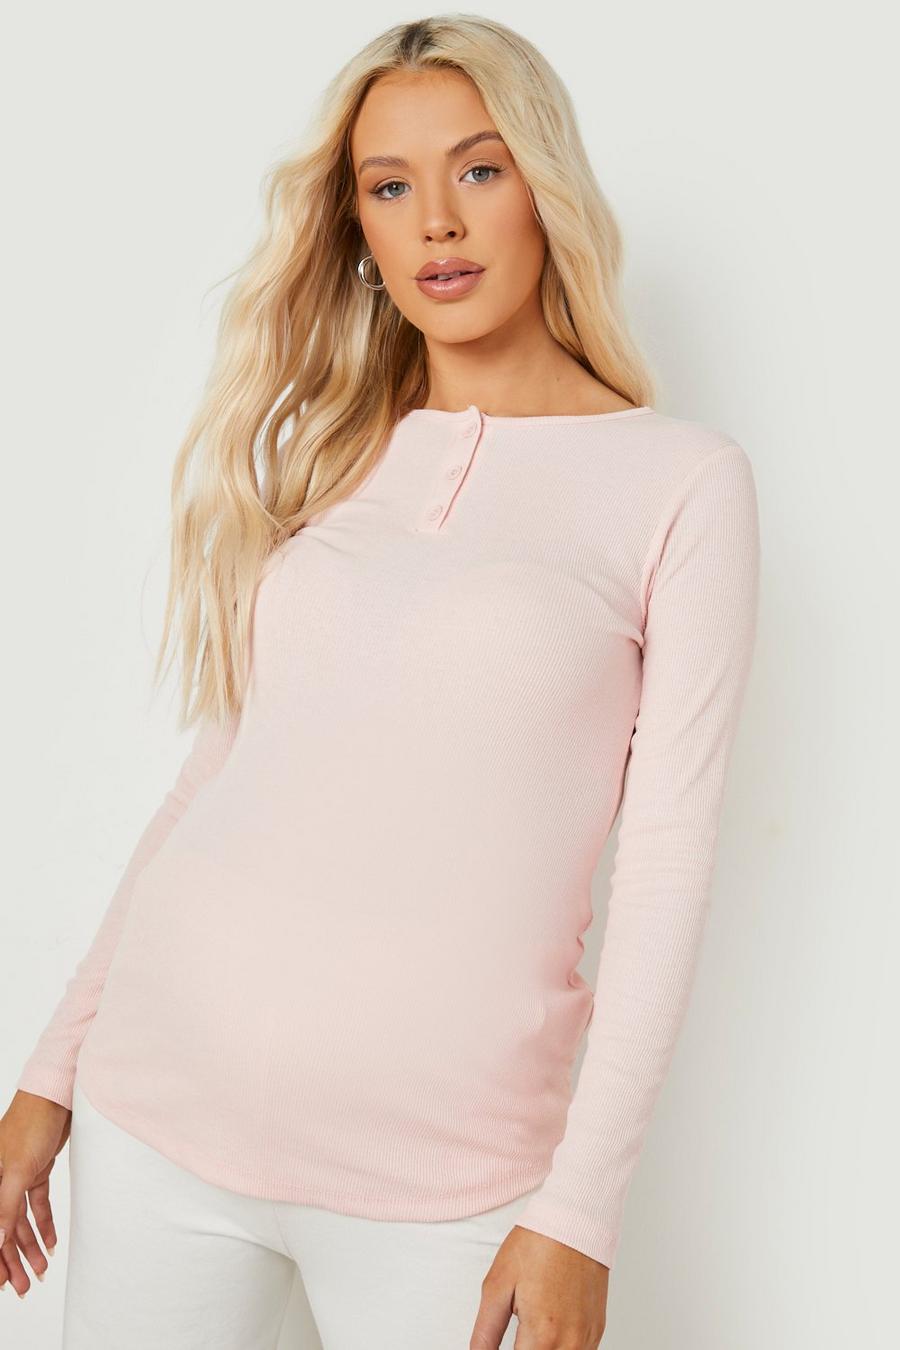 Blush rose Maternity Nursing Button Front Ruched T-shirt